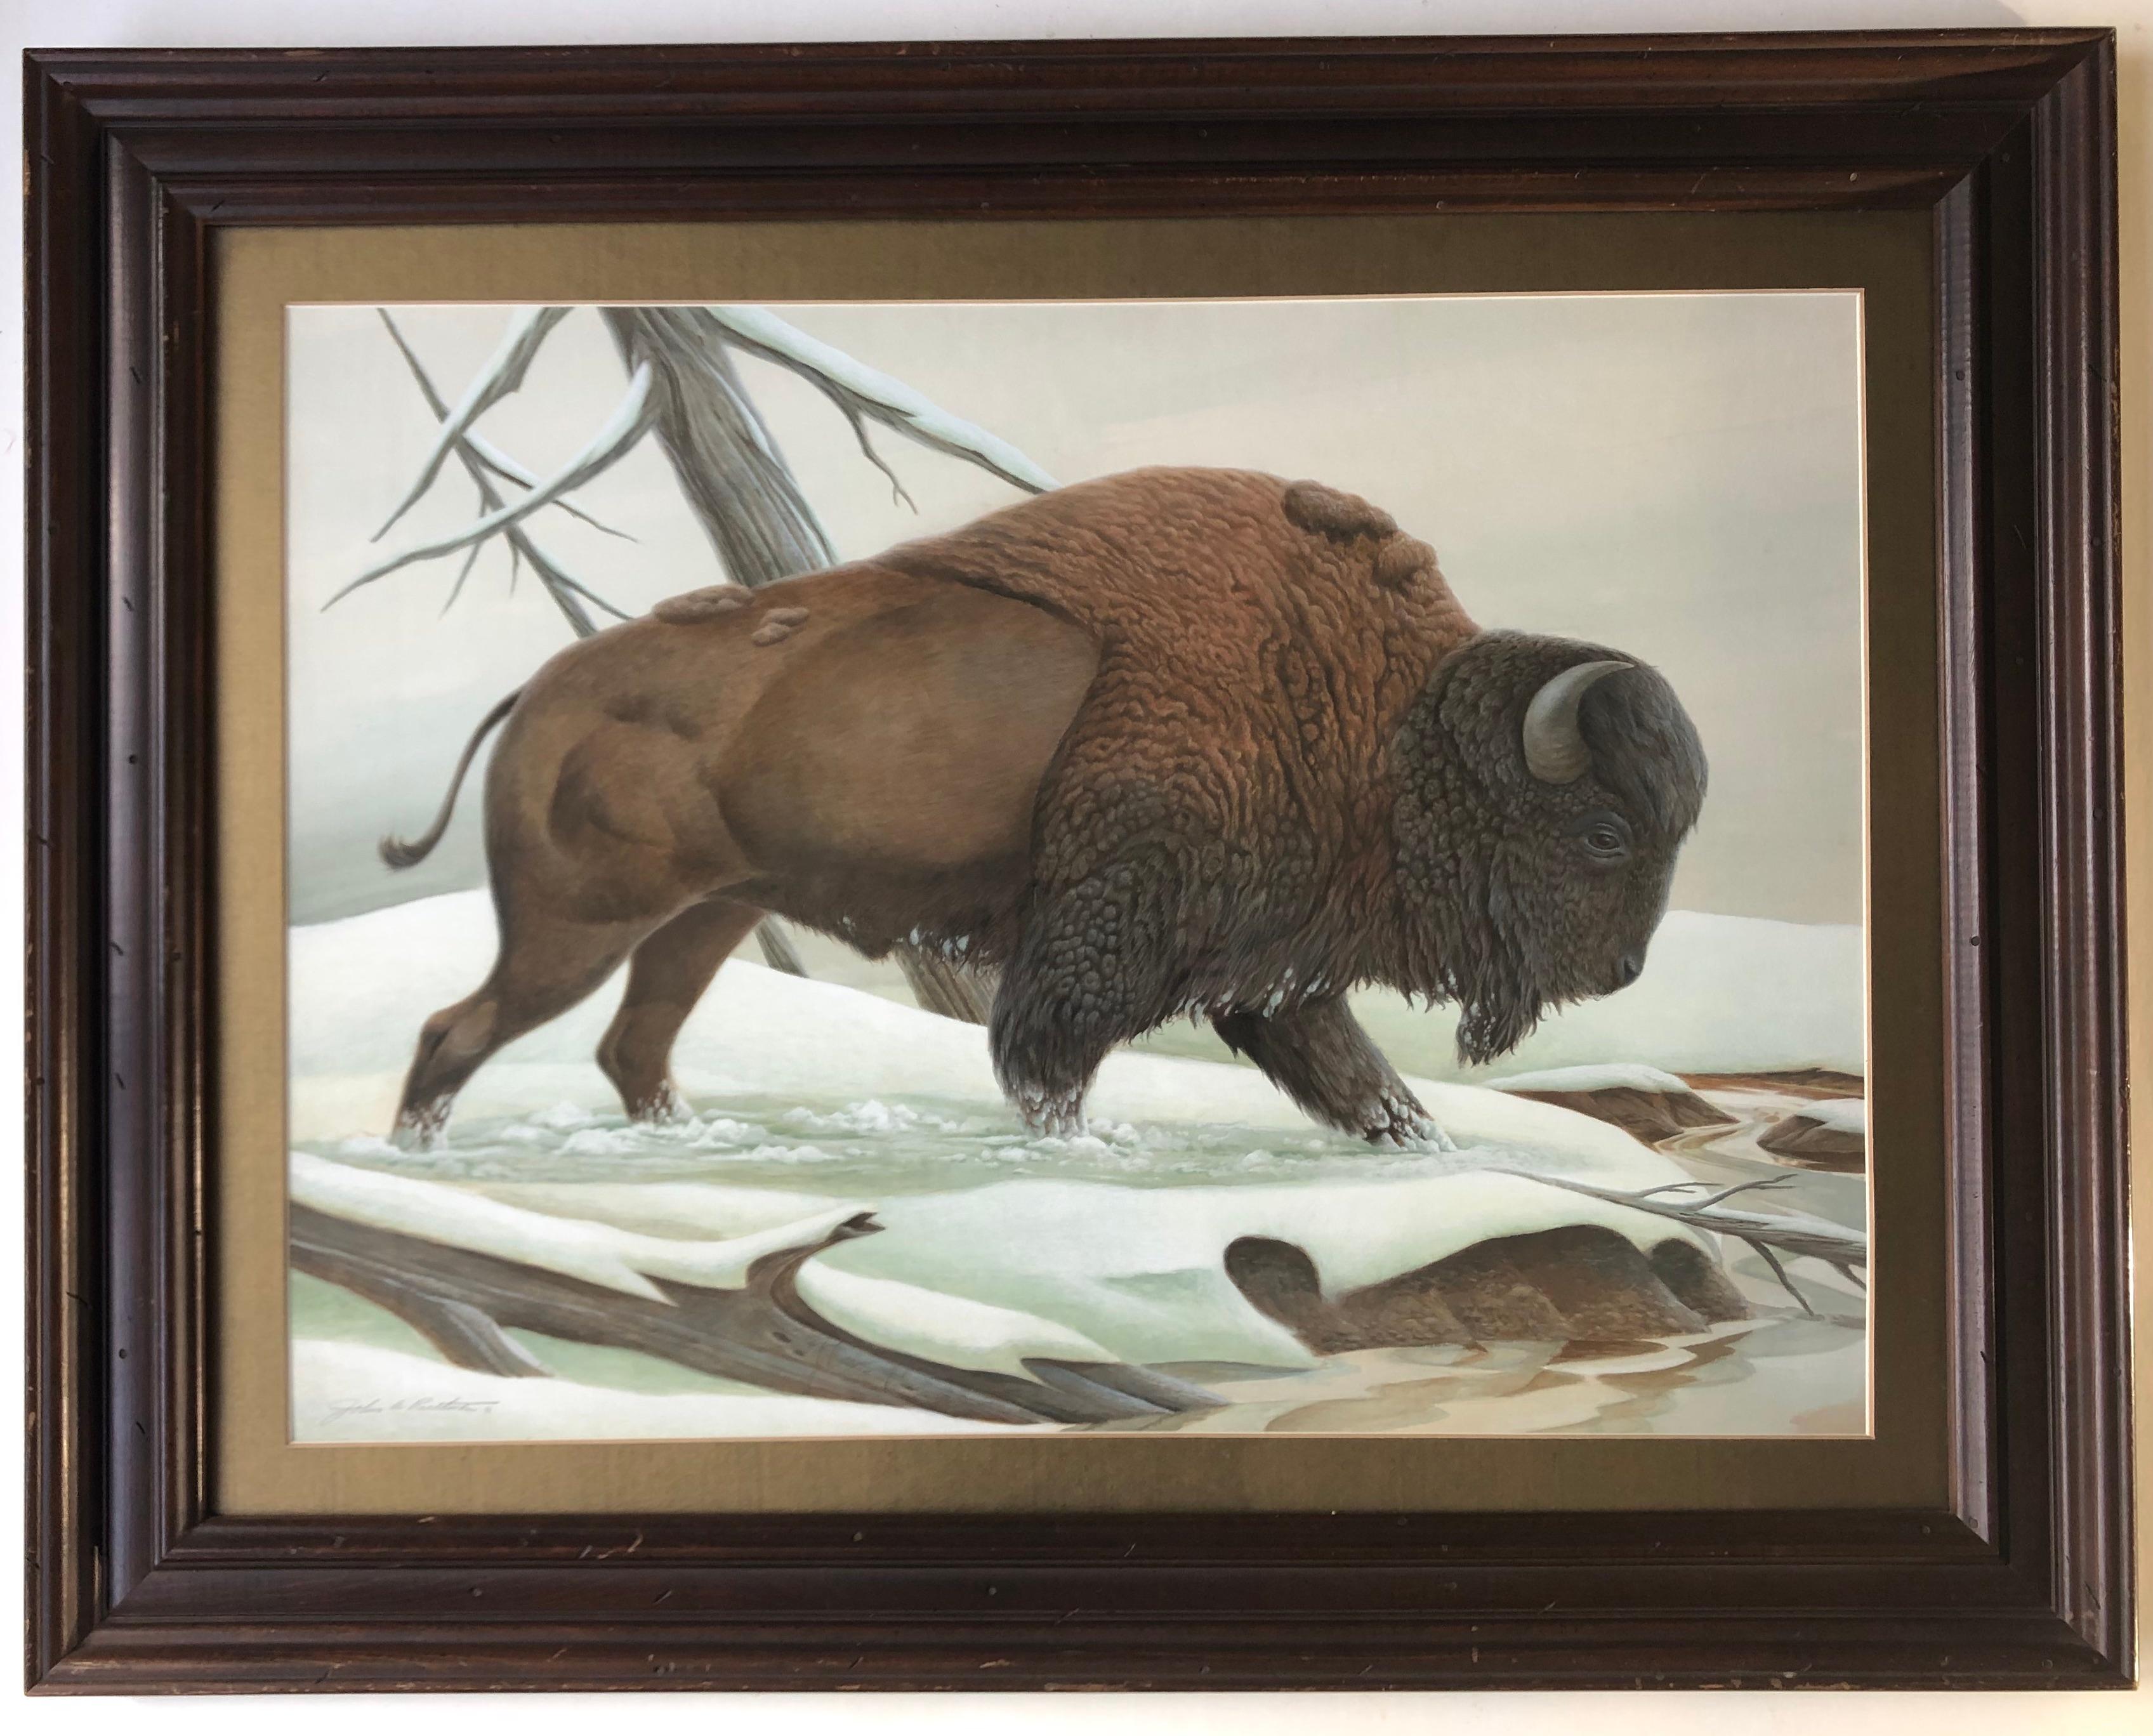 Bison in Snow, Animal Picture, American School, John Aldrich Ruthven, signed - Art by John Ruthven